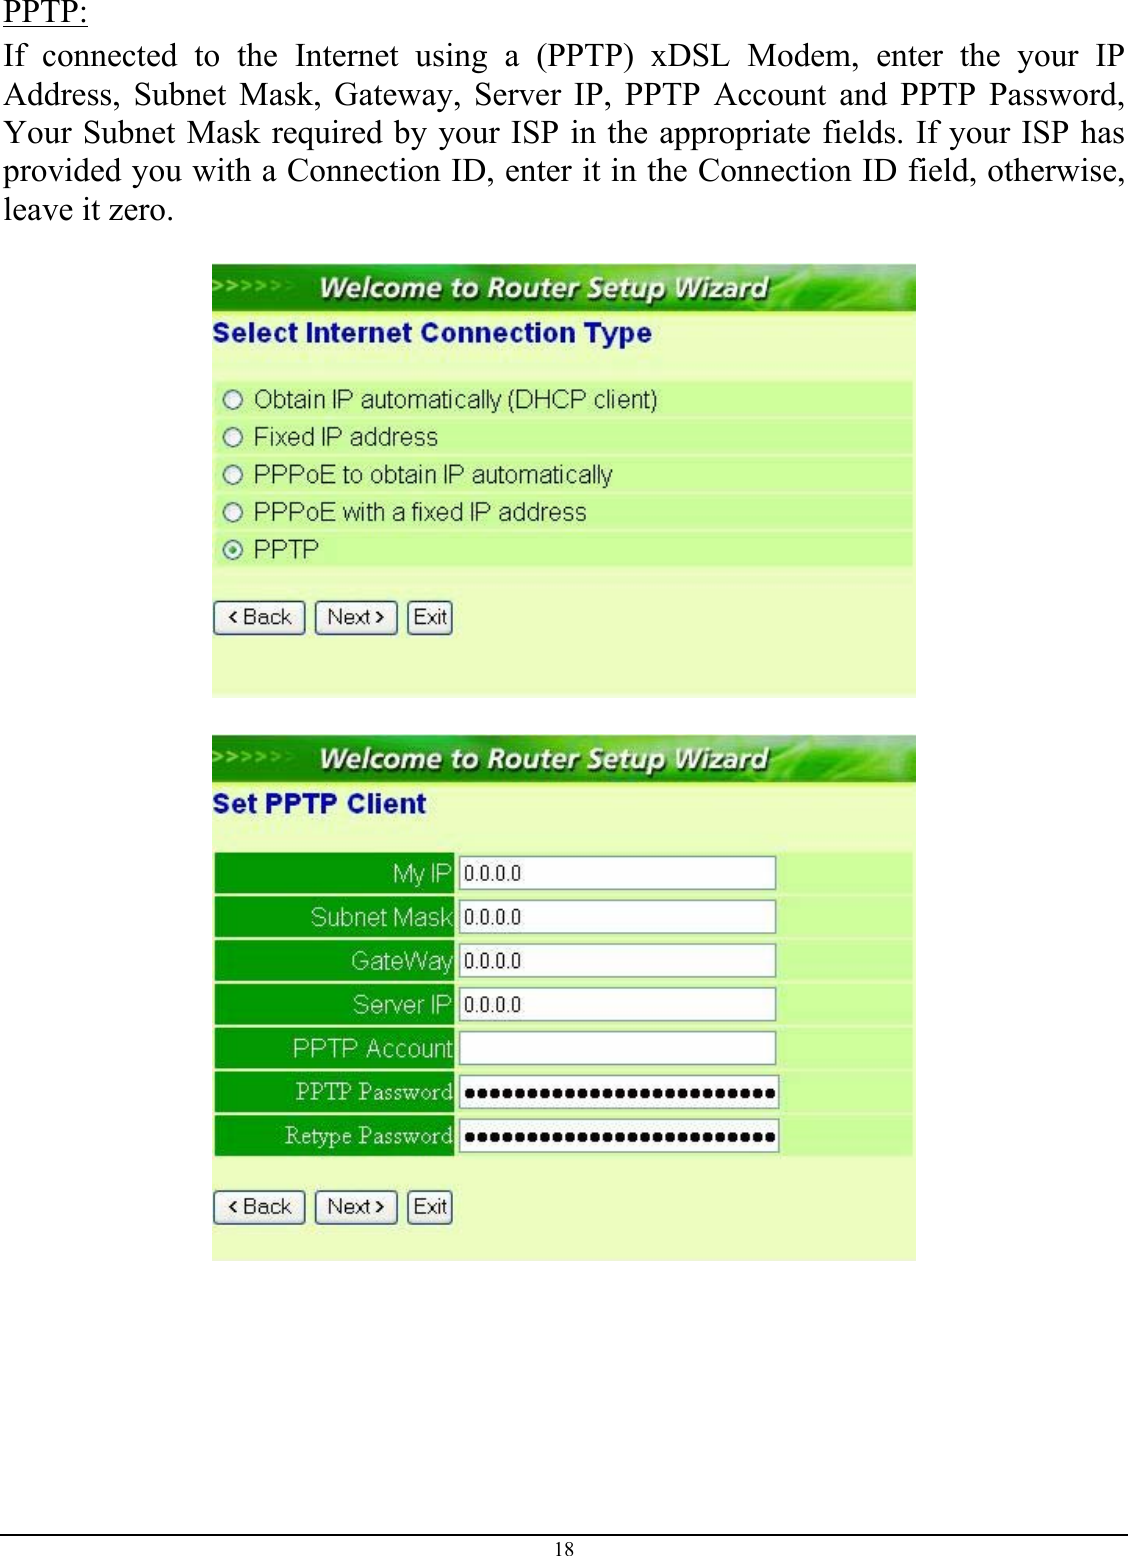 18 PPTP: If connected to the Internet using a (PPTP) xDSL Modem, enter the your IP Address, Subnet Mask, Gateway, Server IP, PPTP Account and PPTP Password, Your Subnet Mask required by your ISP in the appropriate fields. If your ISP has provided you with a Connection ID, enter it in the Connection ID field, otherwise, leave it zero.        